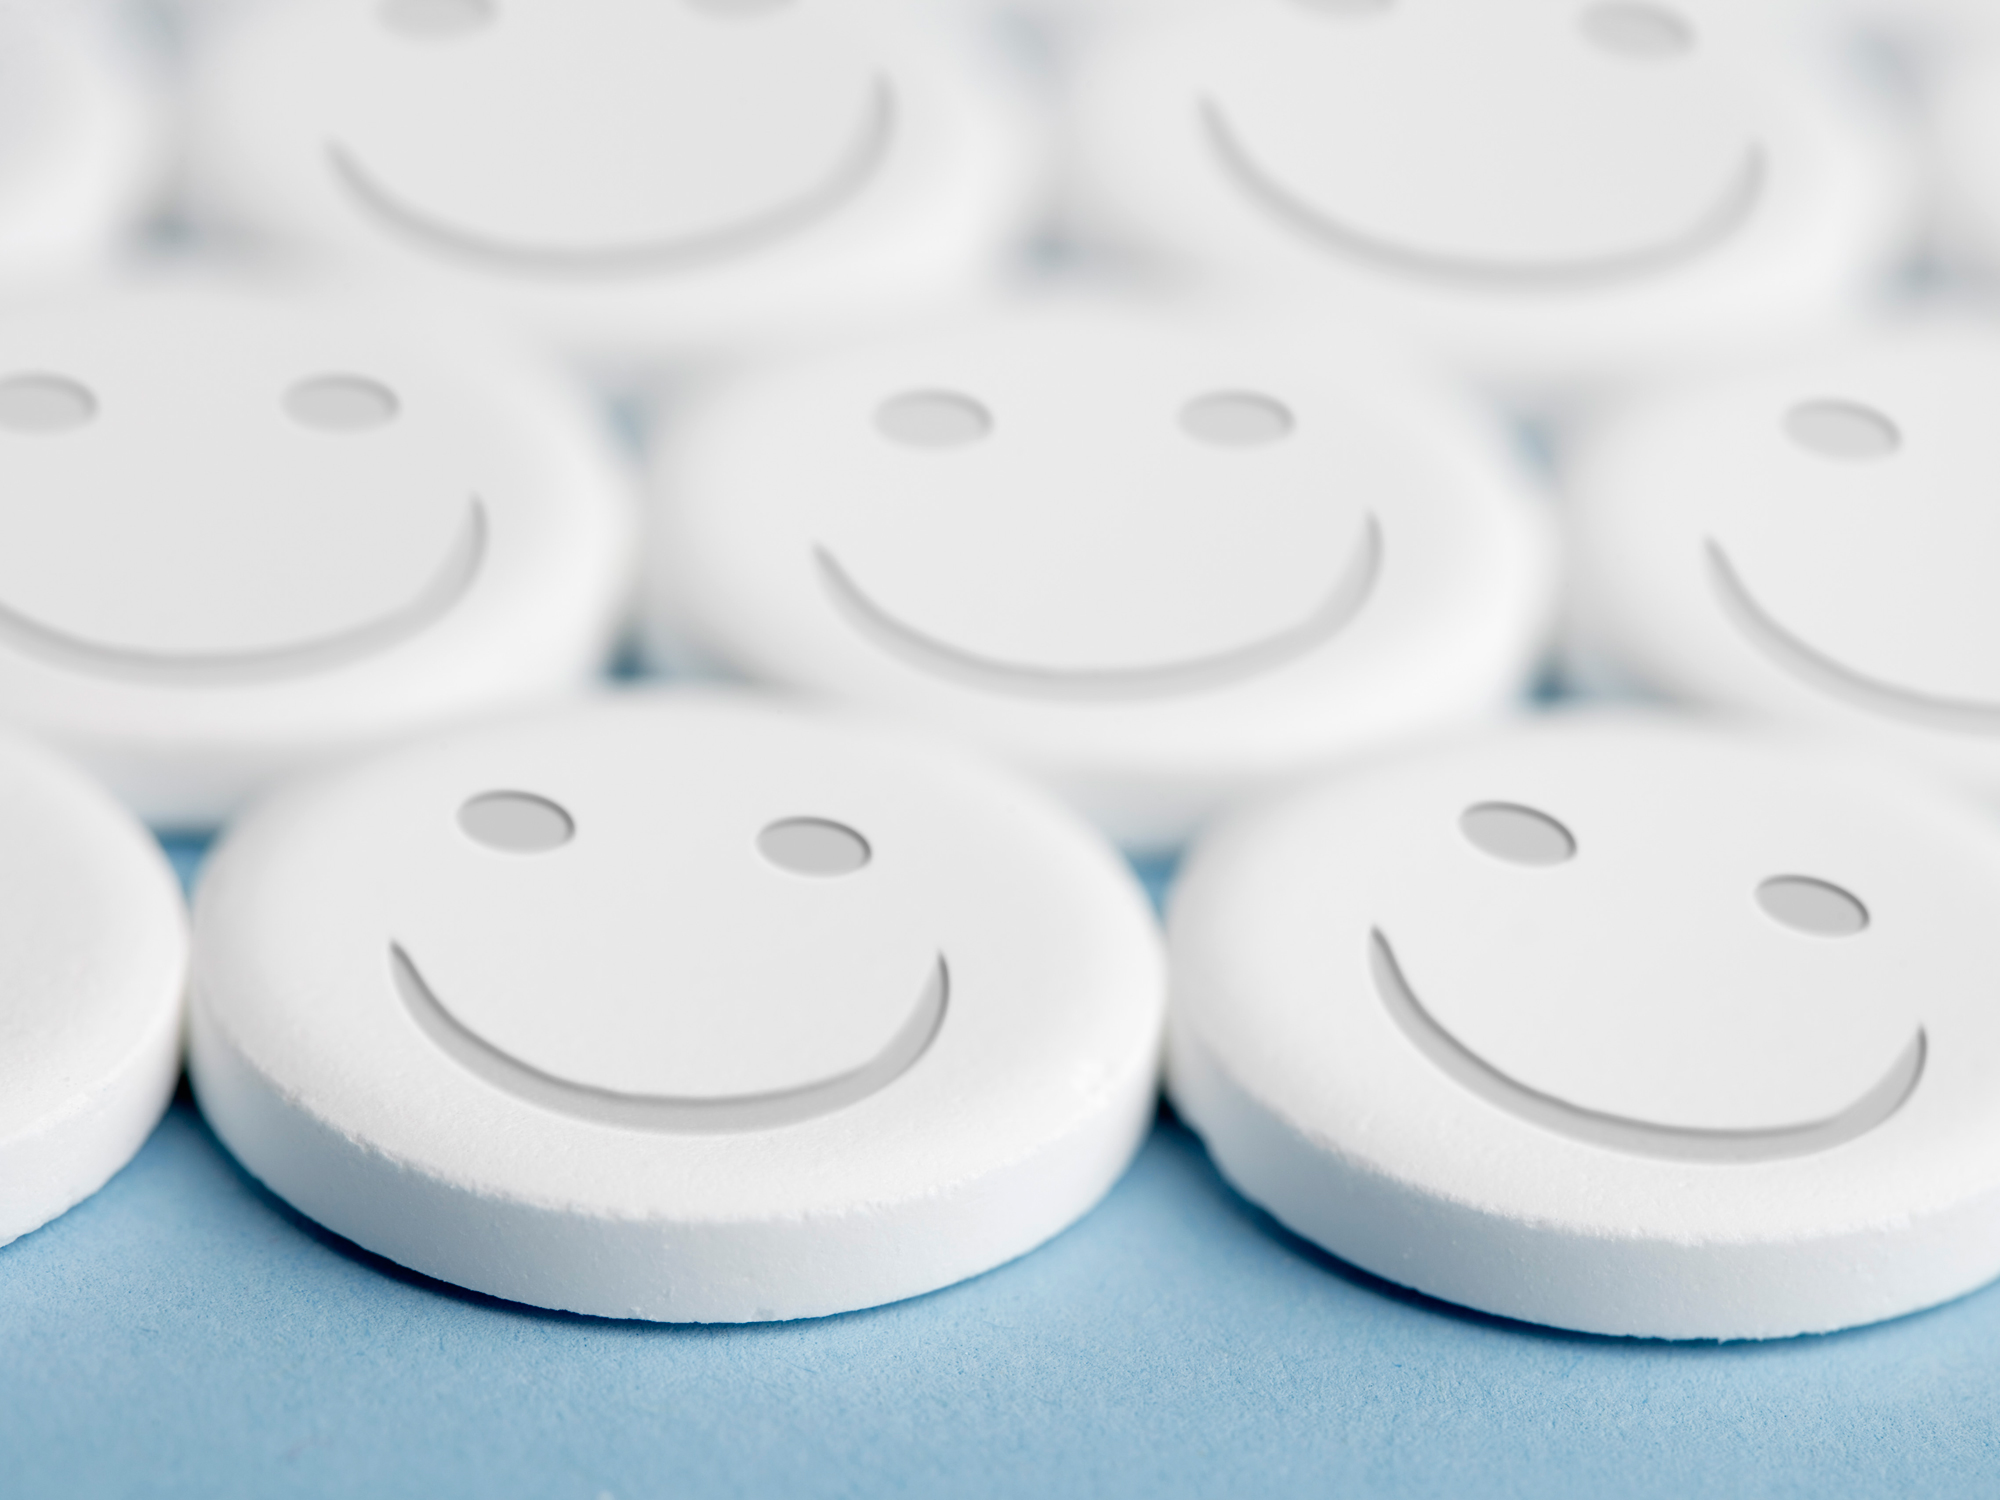 The pills that make you more depressed